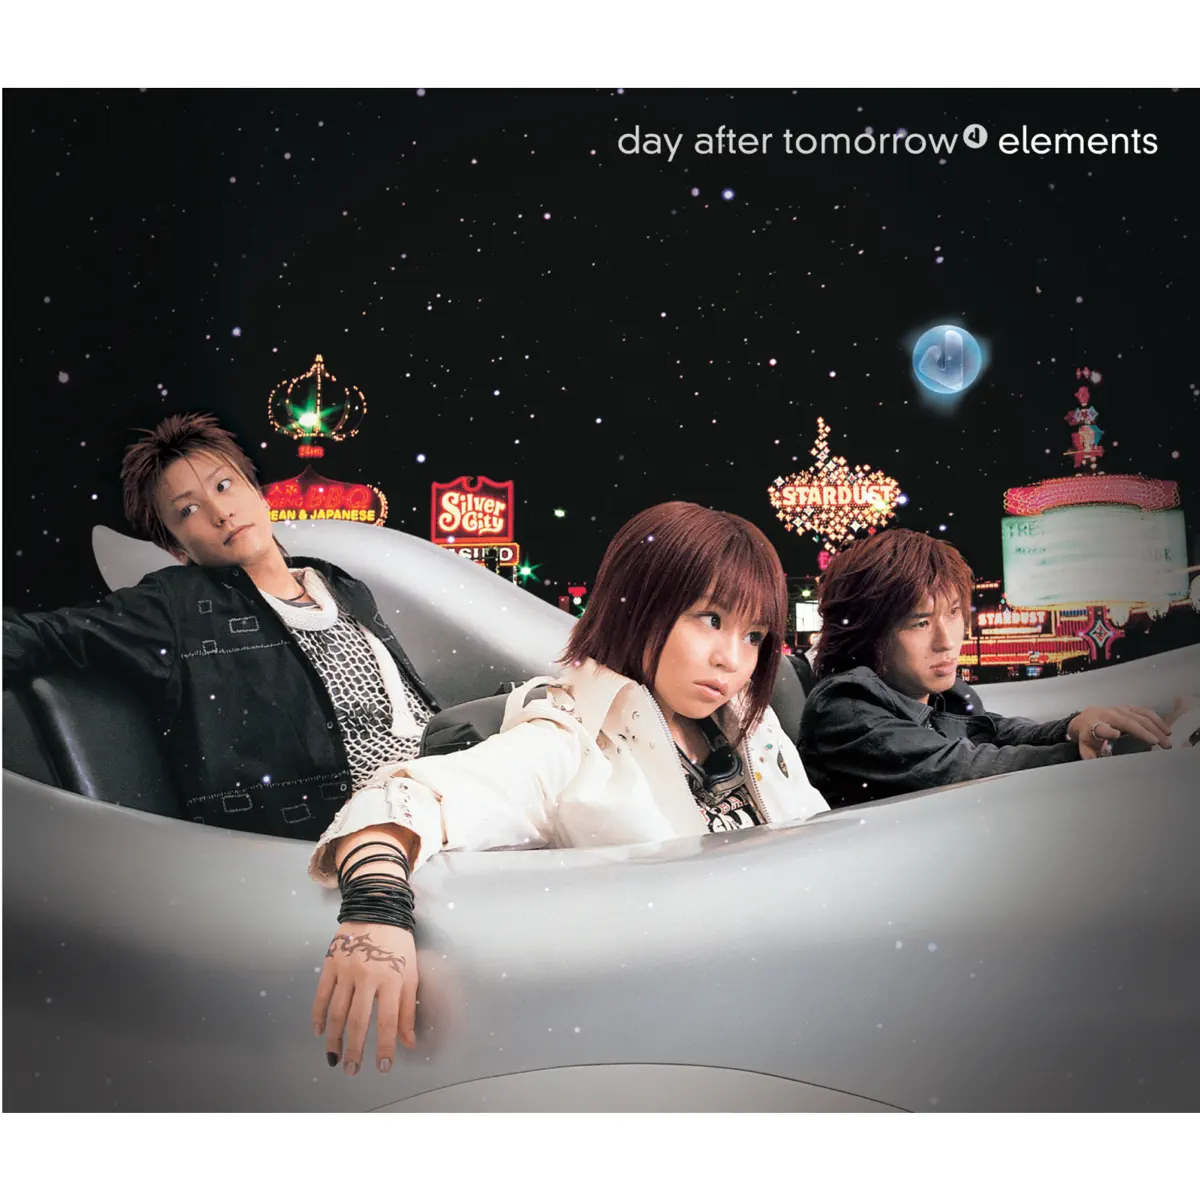 day after tomorrow - elements (2003) [iTunes Plus AAC M4A]-新房子